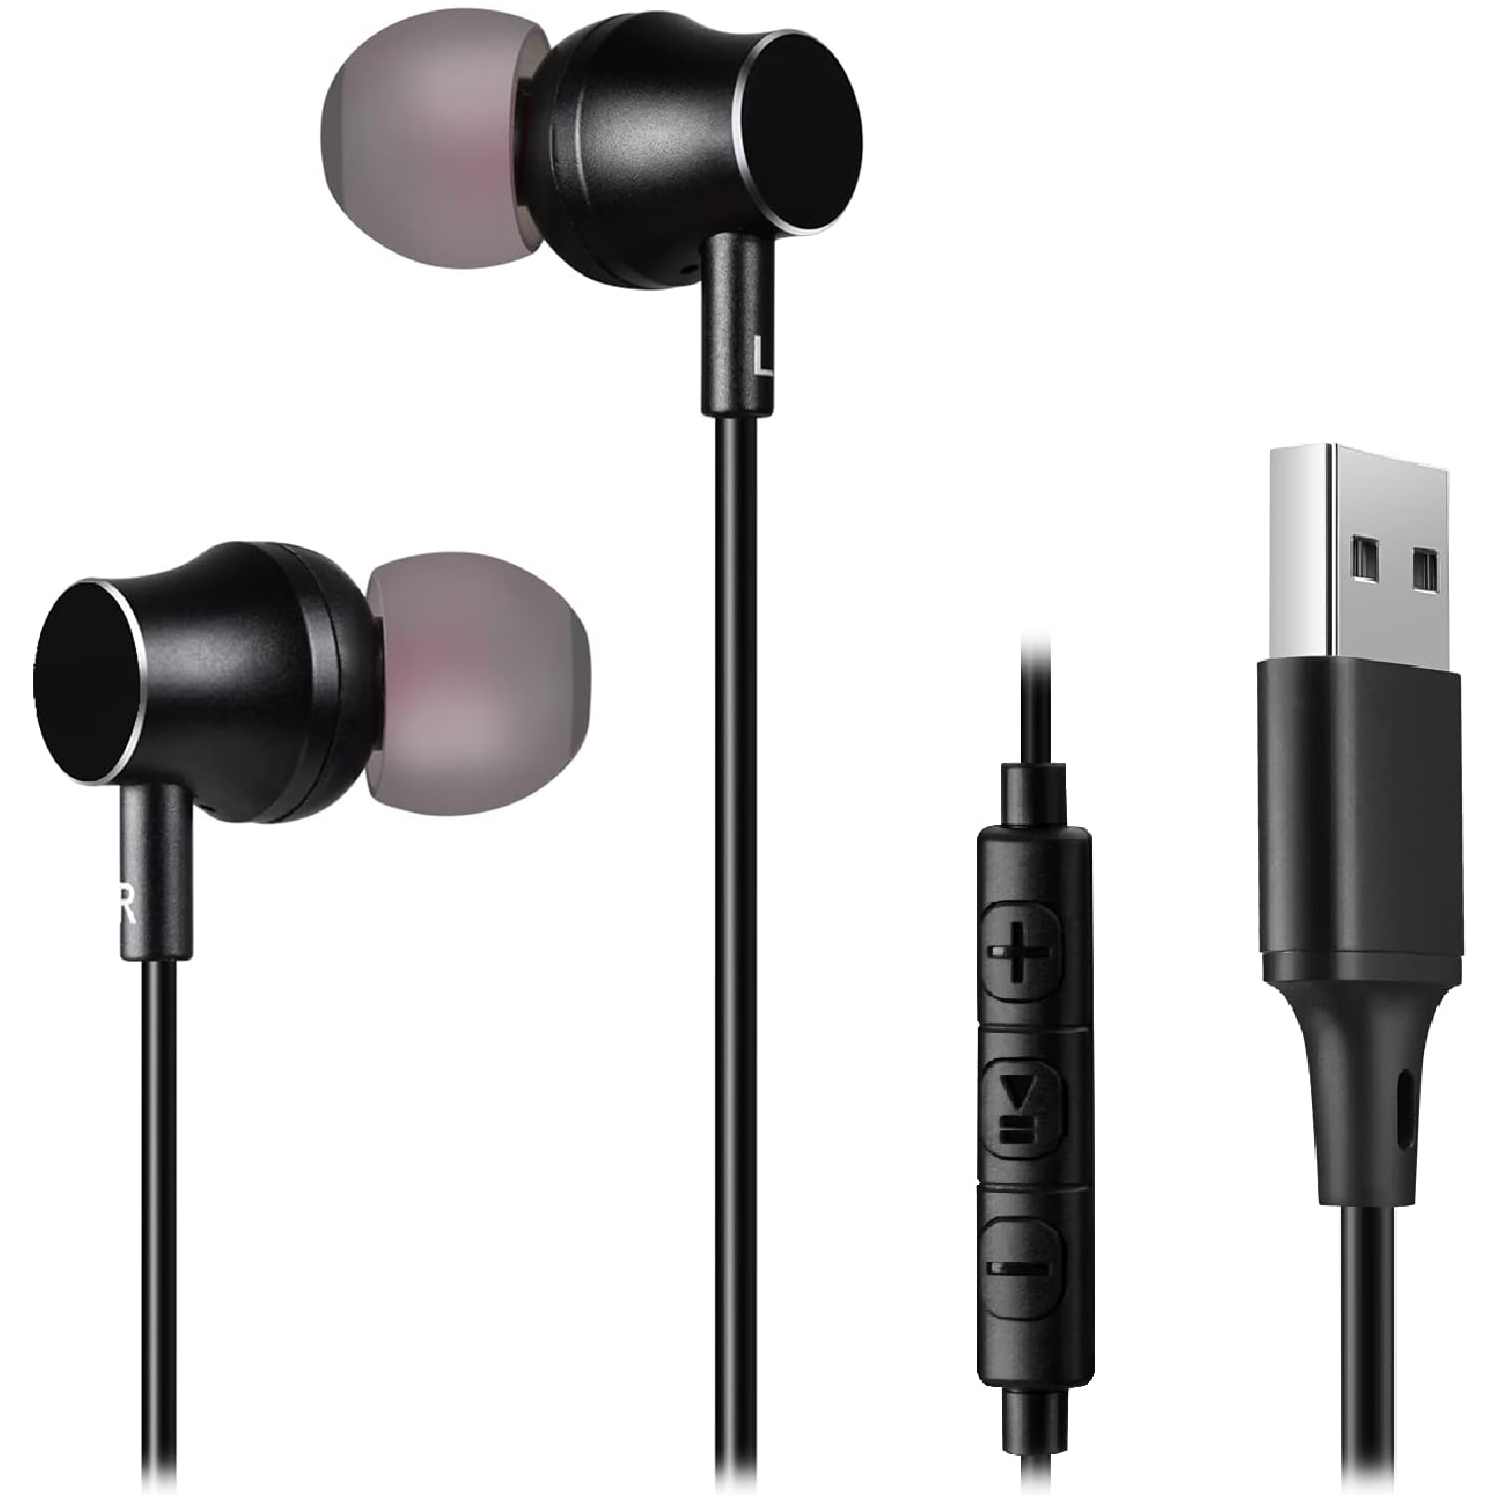 USB Earbuds for Computer, in-Ear USB Headphones with Microphone & 1.8M Long Cord, Laptop Headset